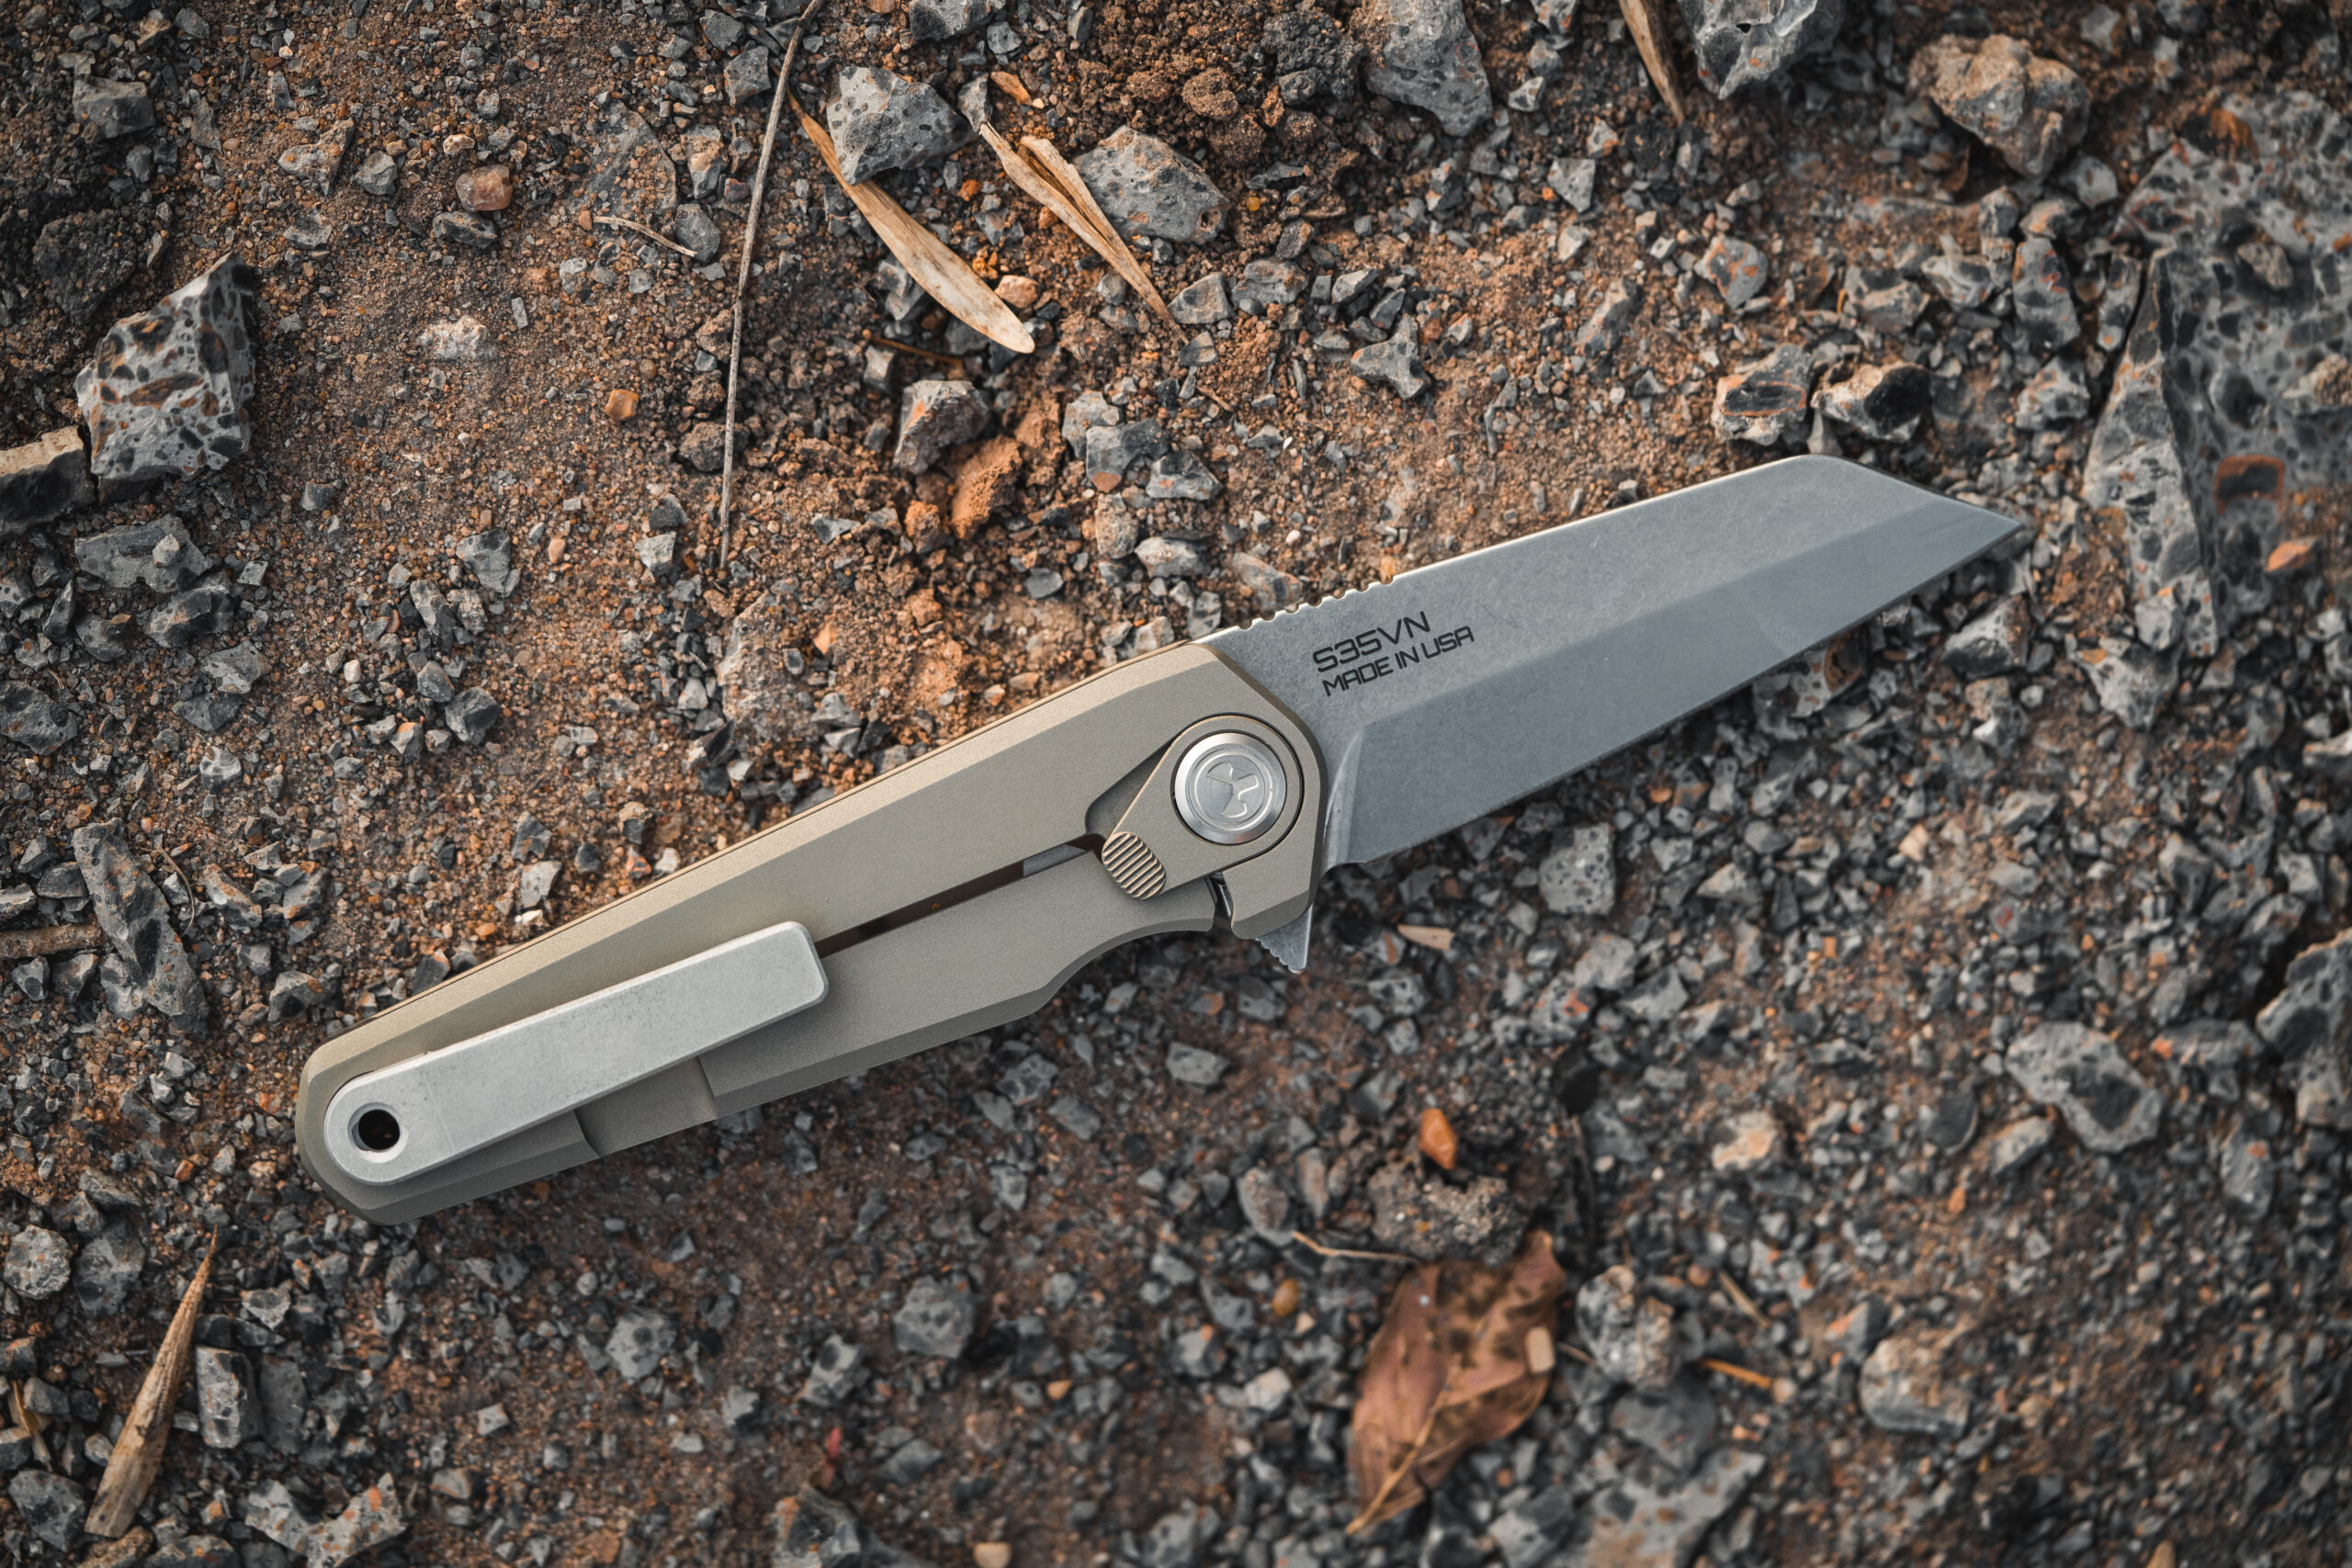 The New MAGPUL Frame Lock Rigger EDC Knife